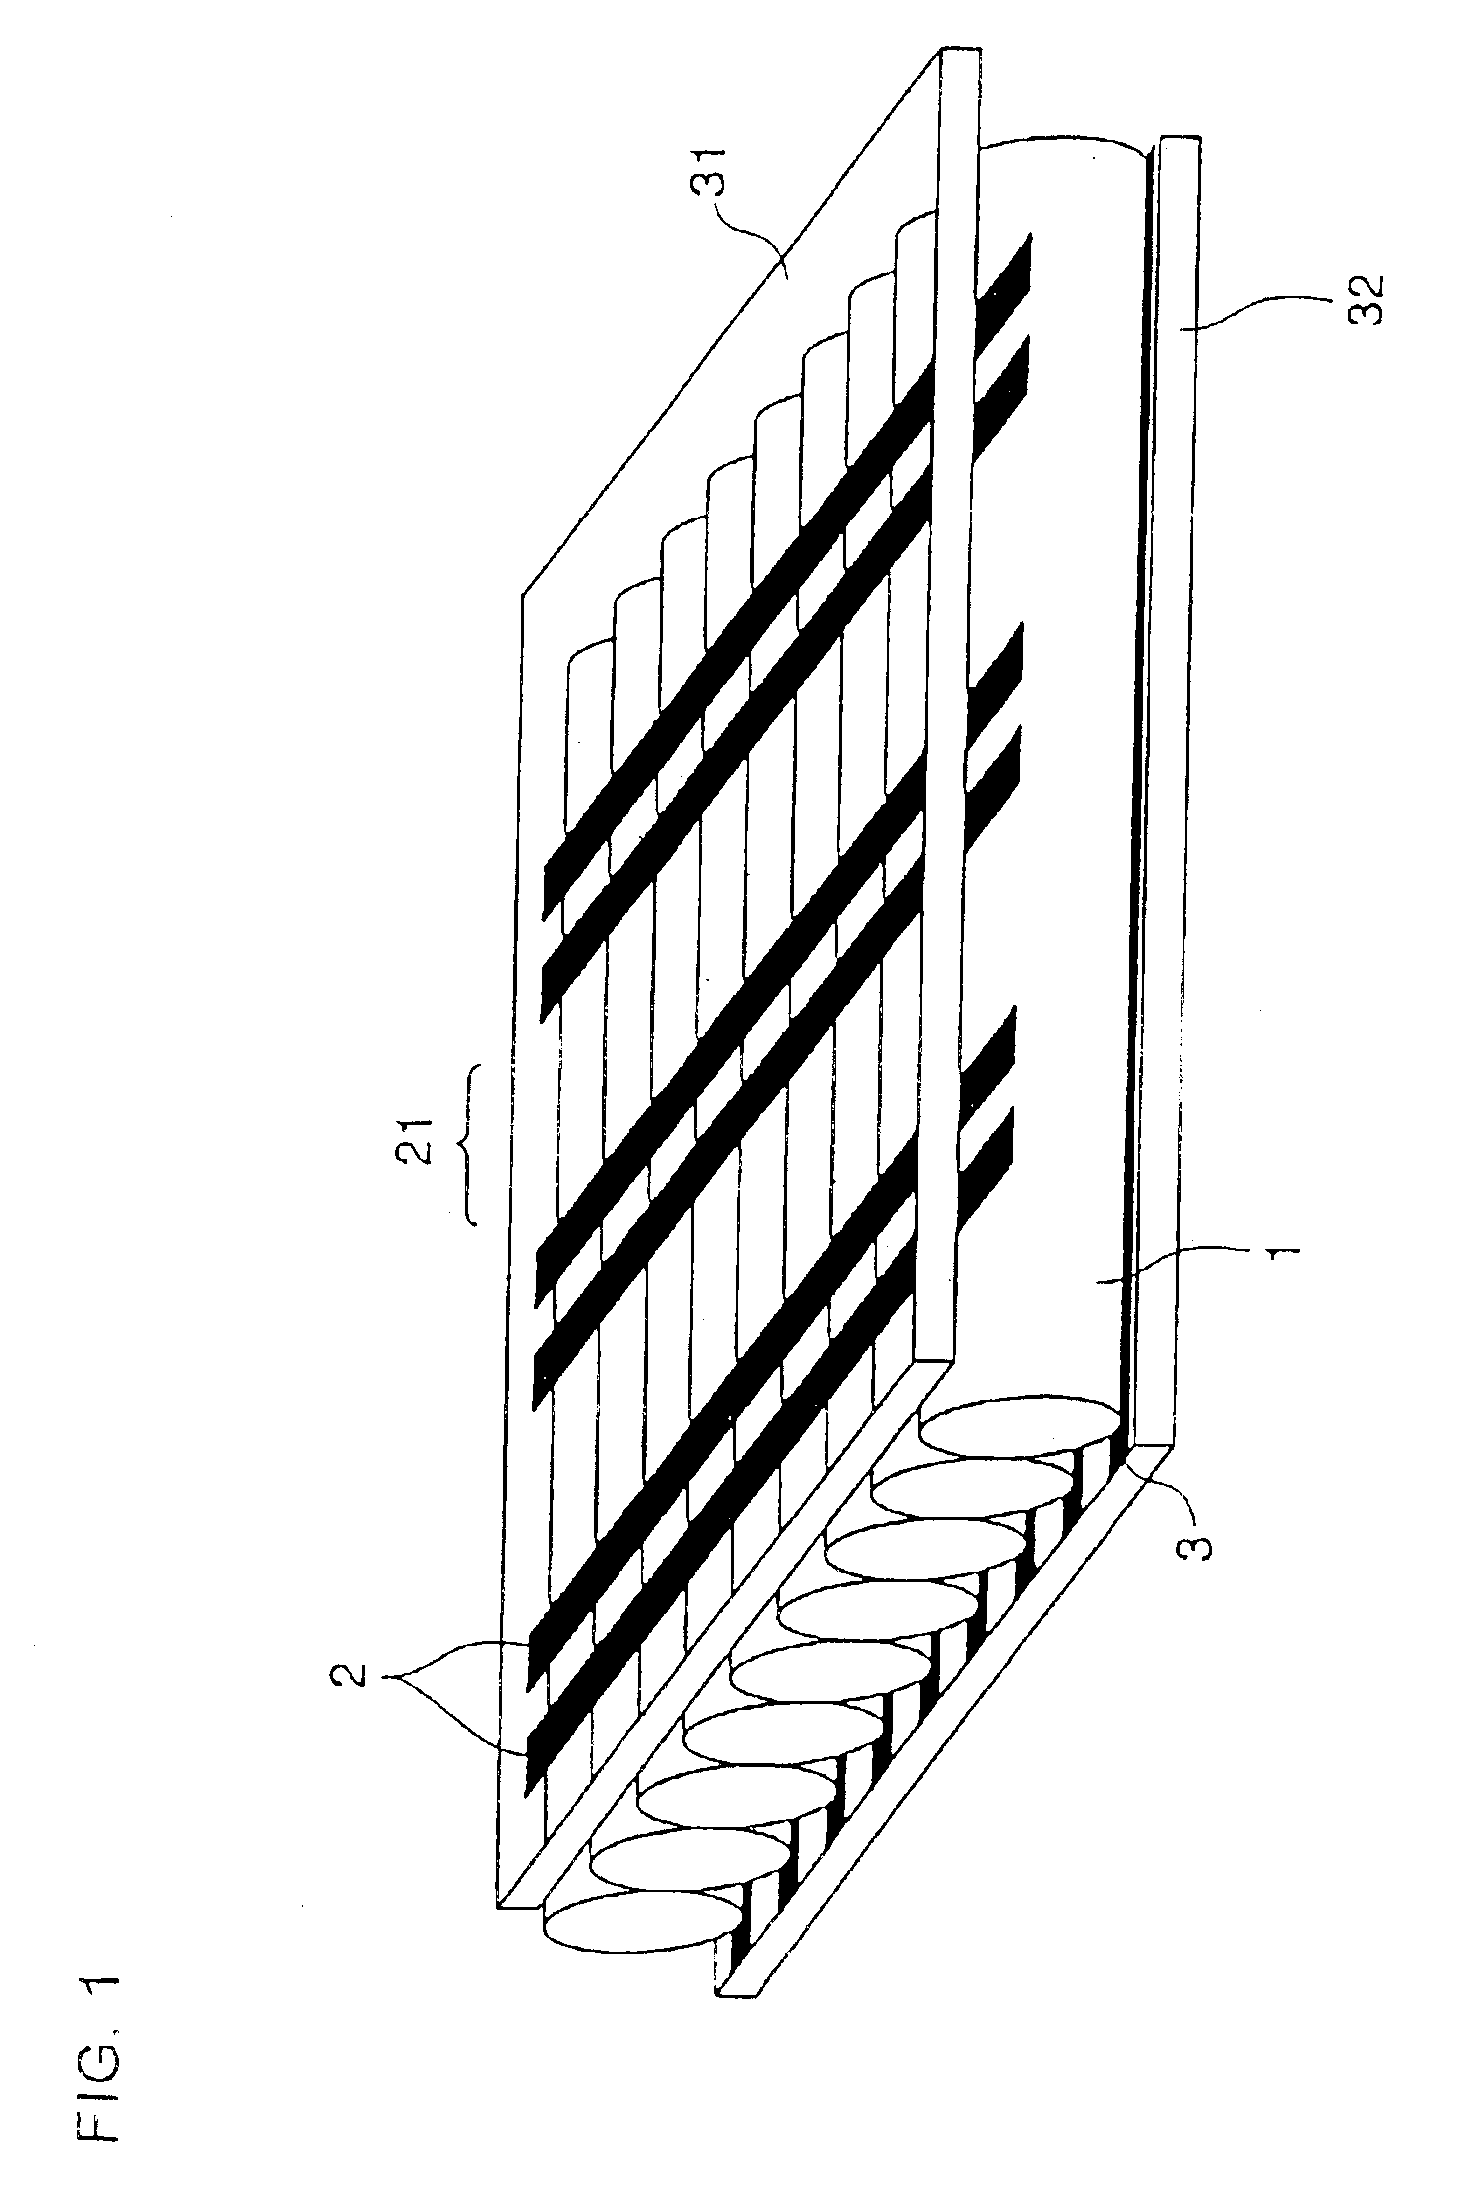 Display device with a plurality of light-emitting tubes arranged in parallel